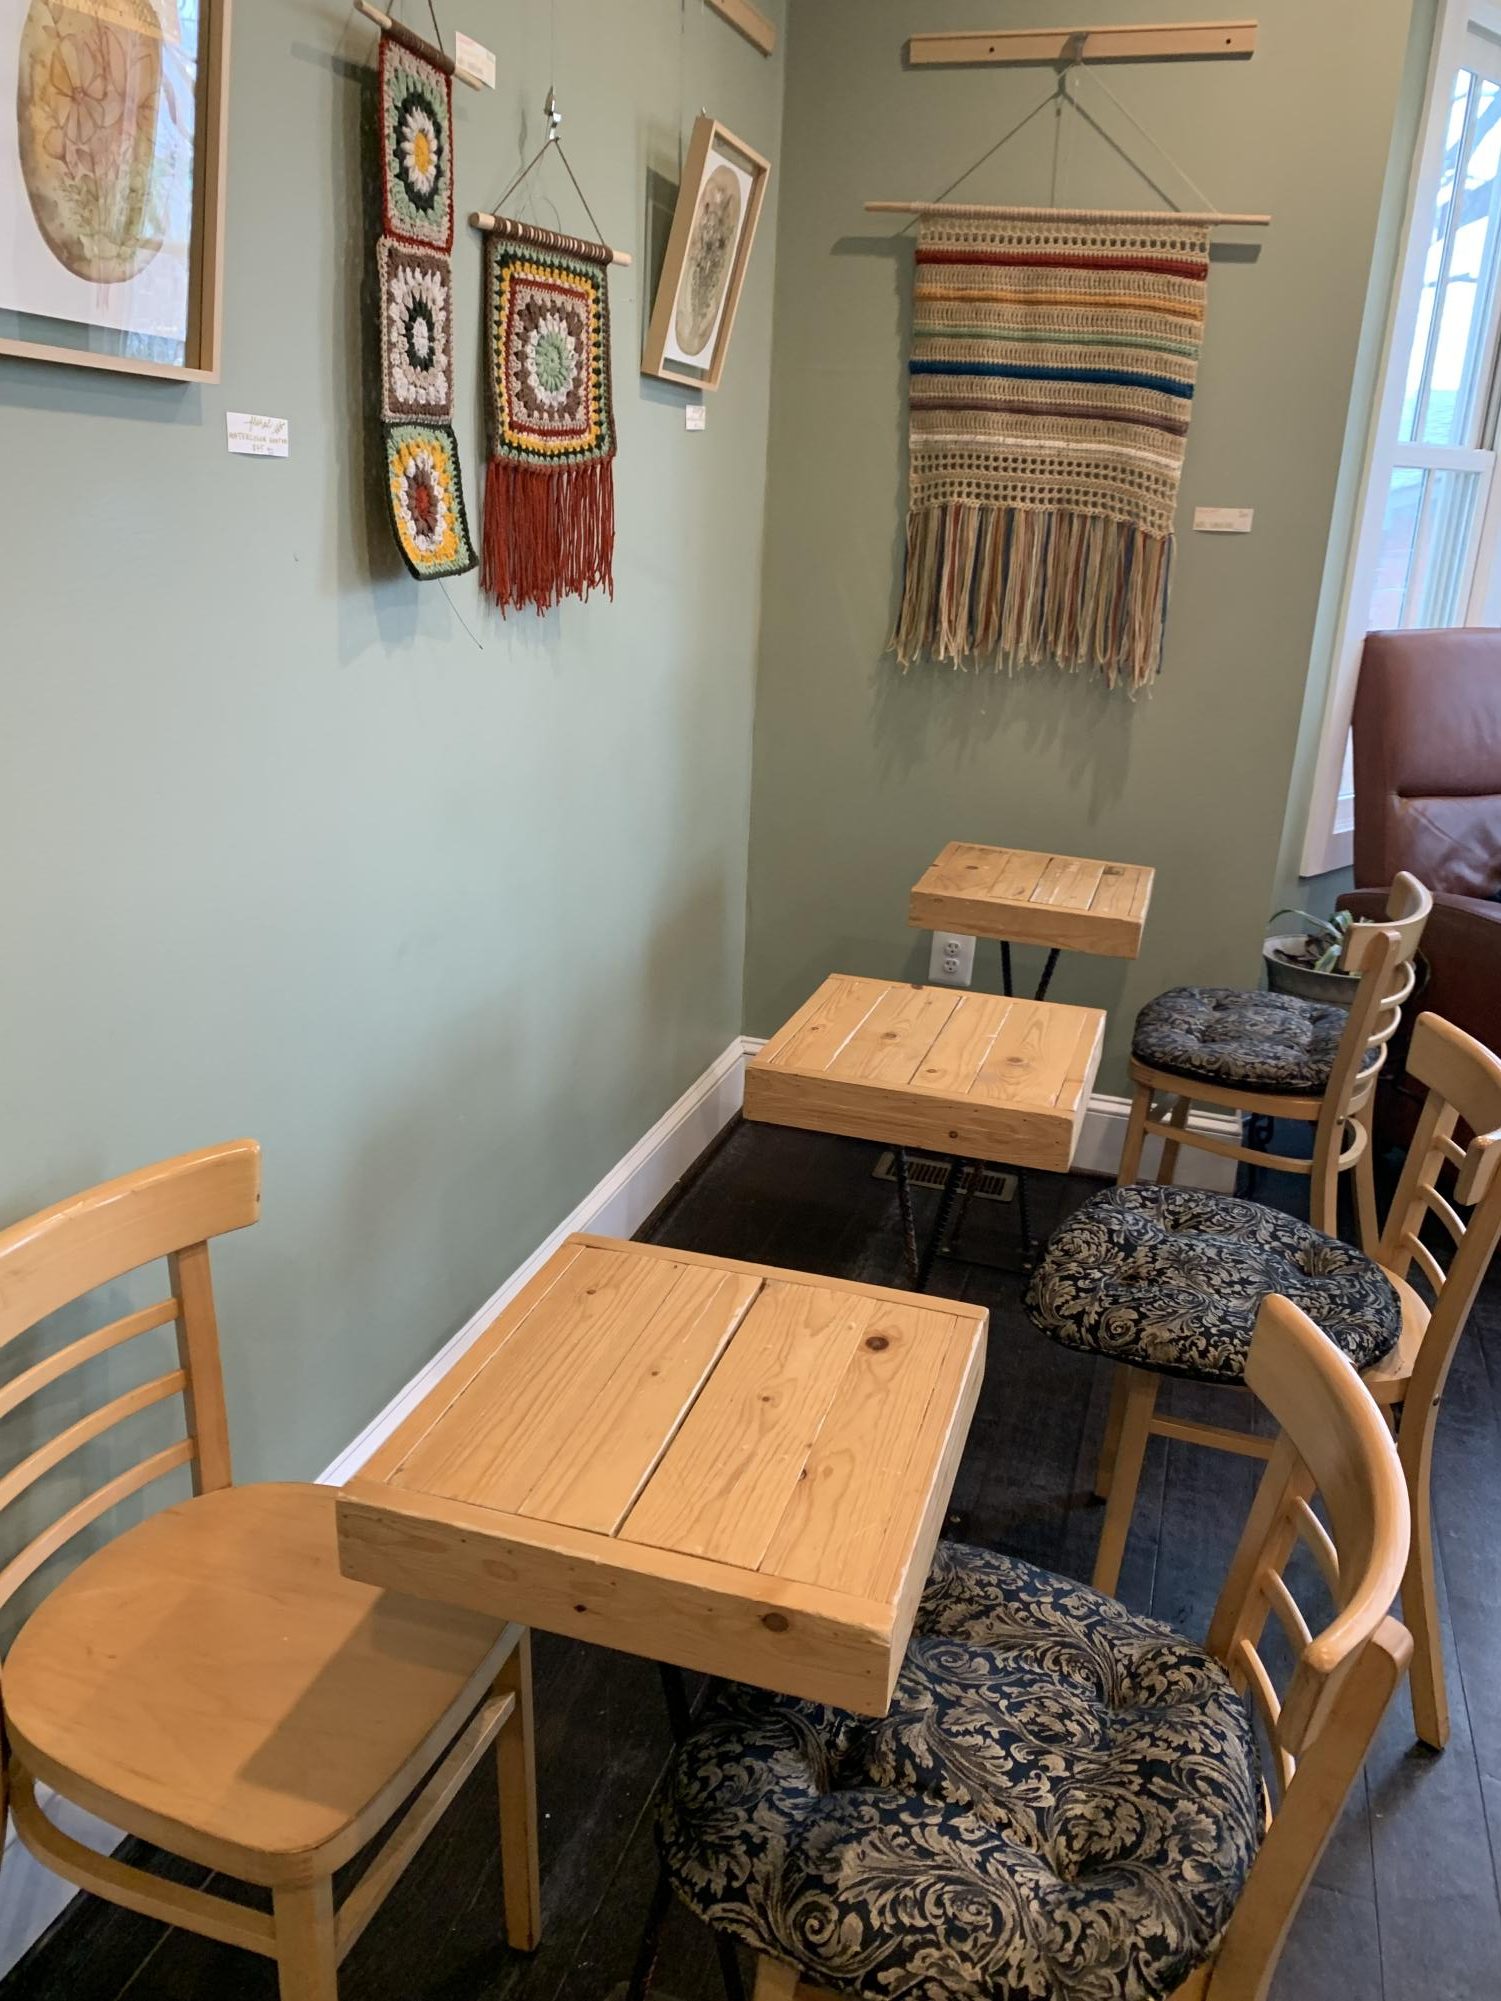 Small tables surrounded by art pieces at Doppio Bunny Coffee. Photo provided by William Den Herder.